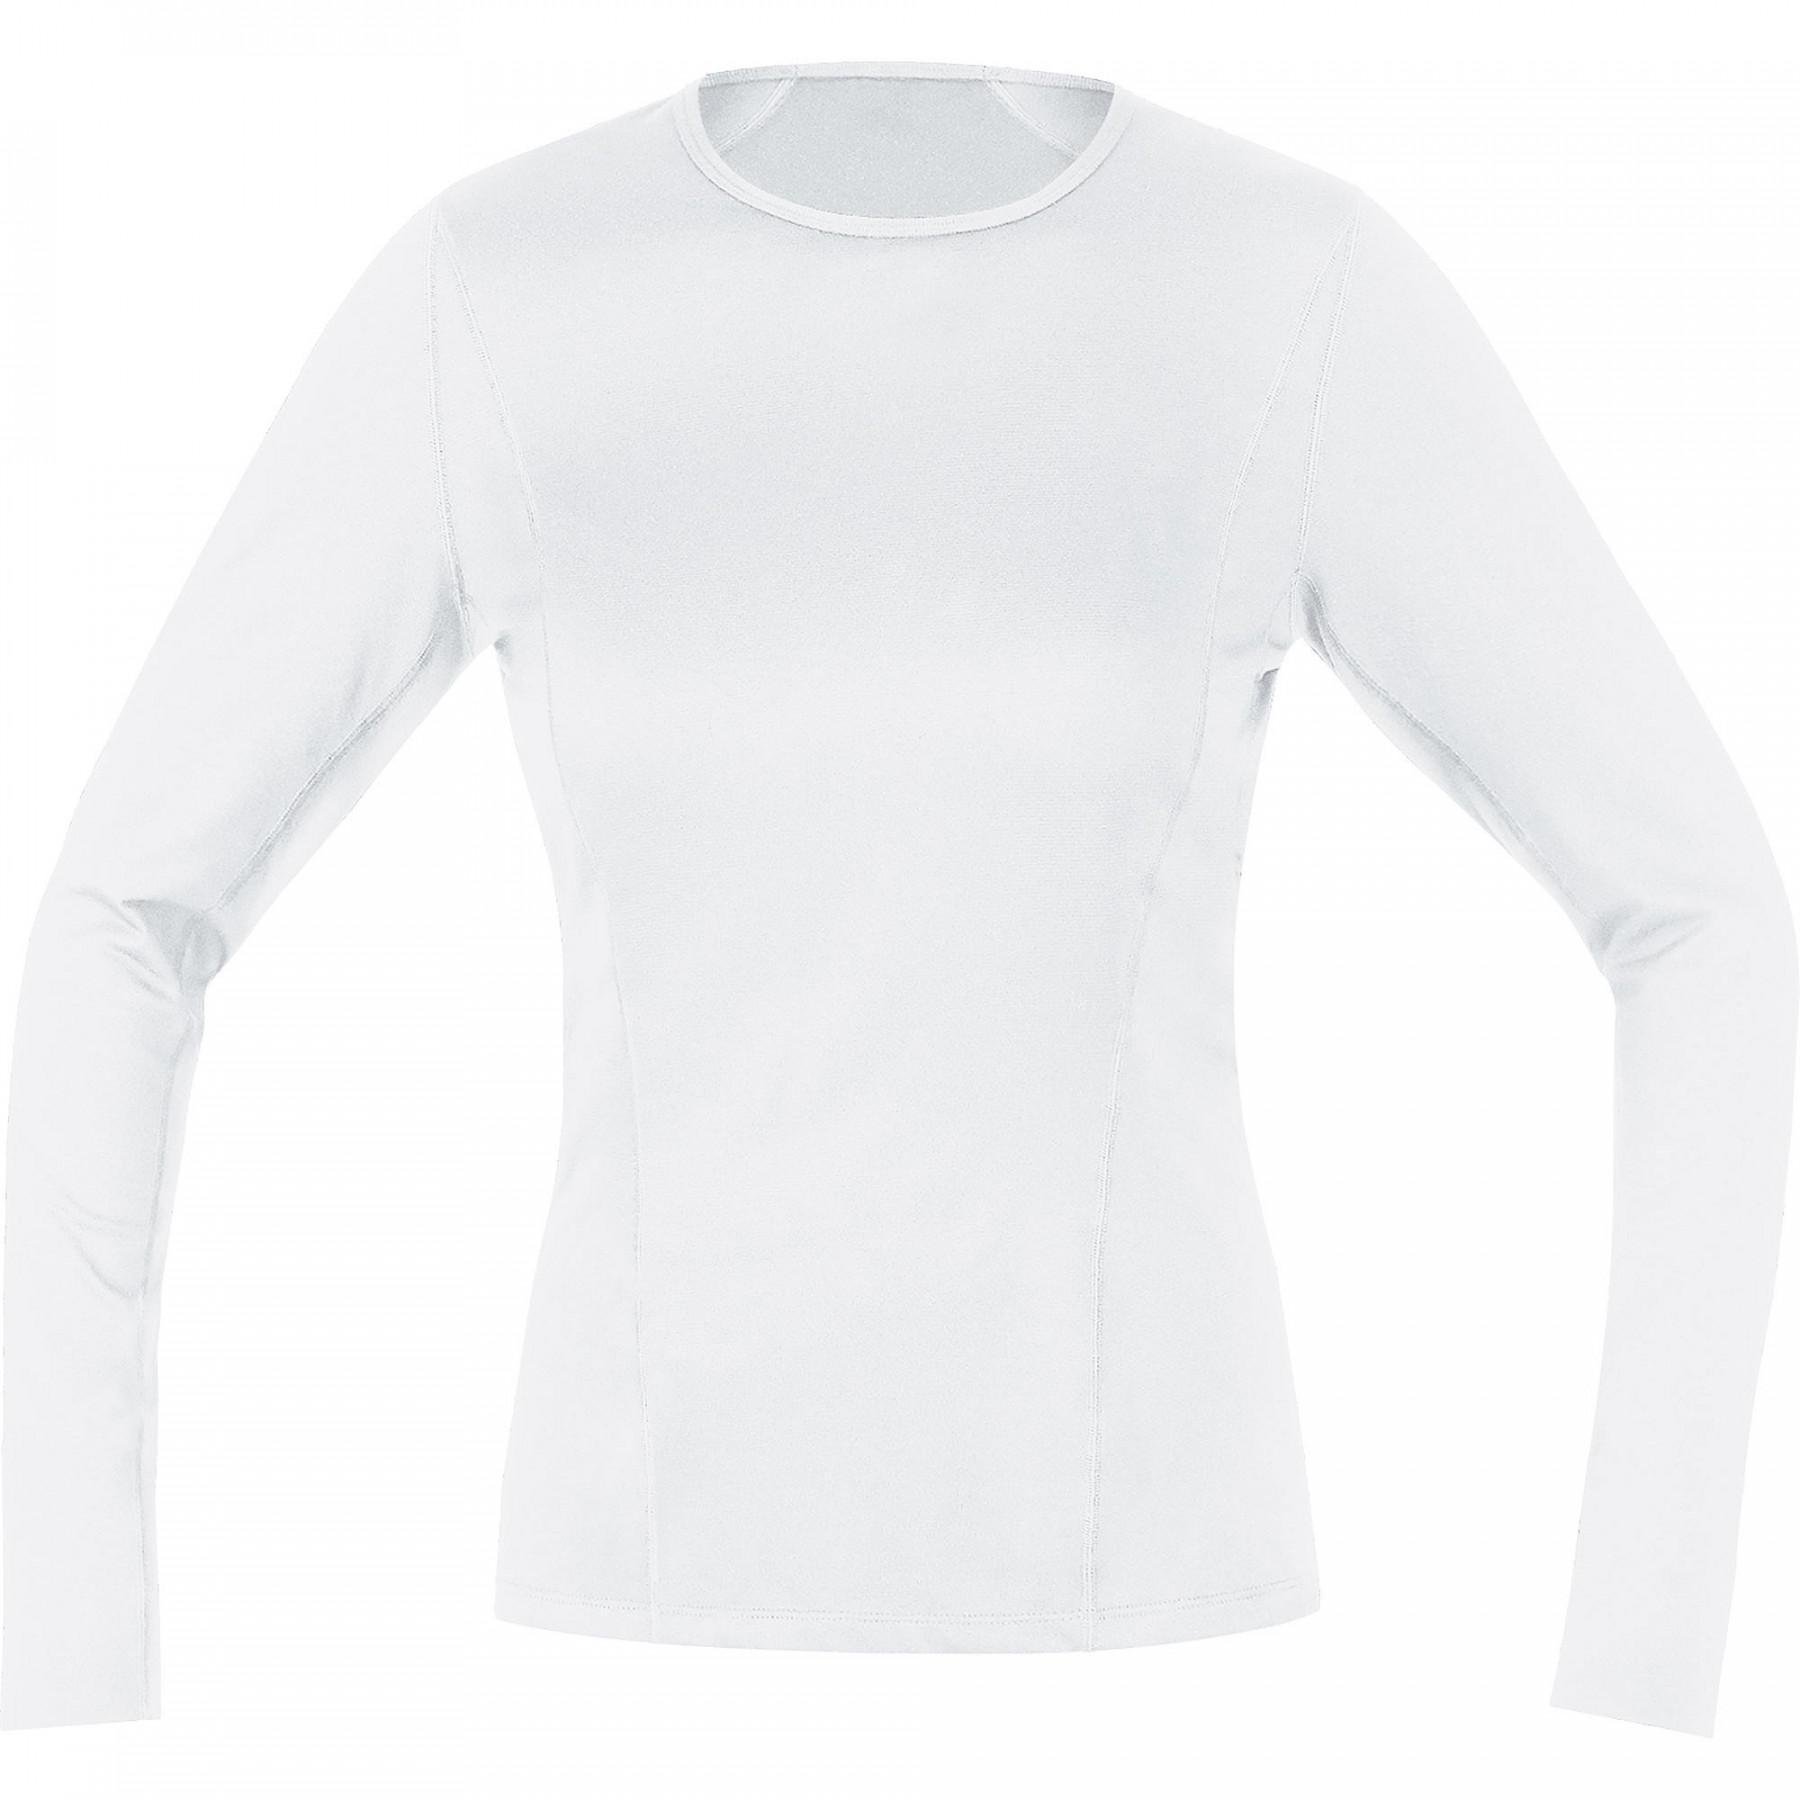 Women's long-sleeved jersey Gore M Thermo